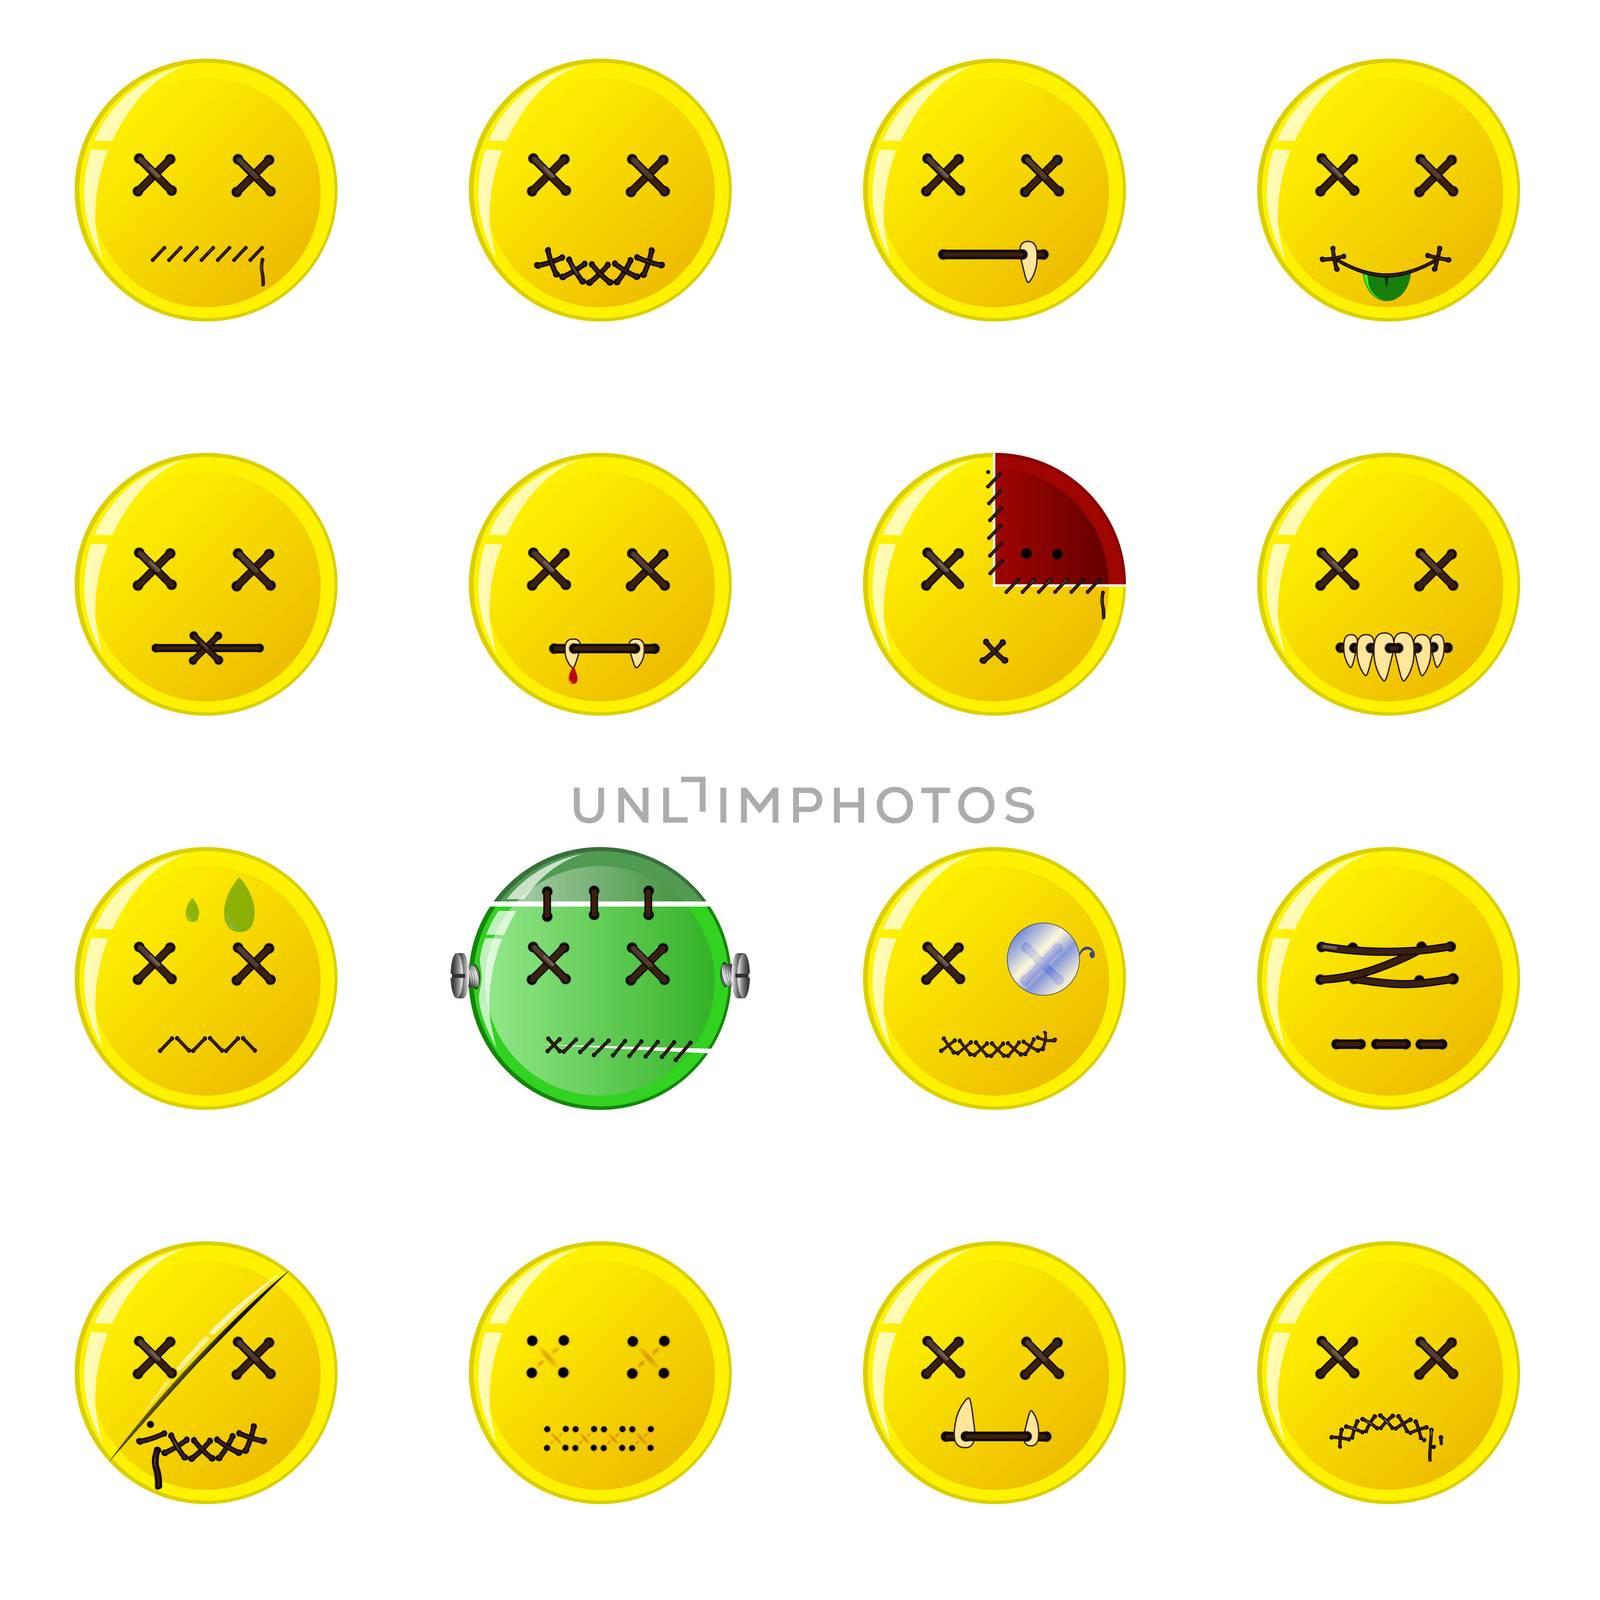 Creepy Smileys - buttons by Rogalevv